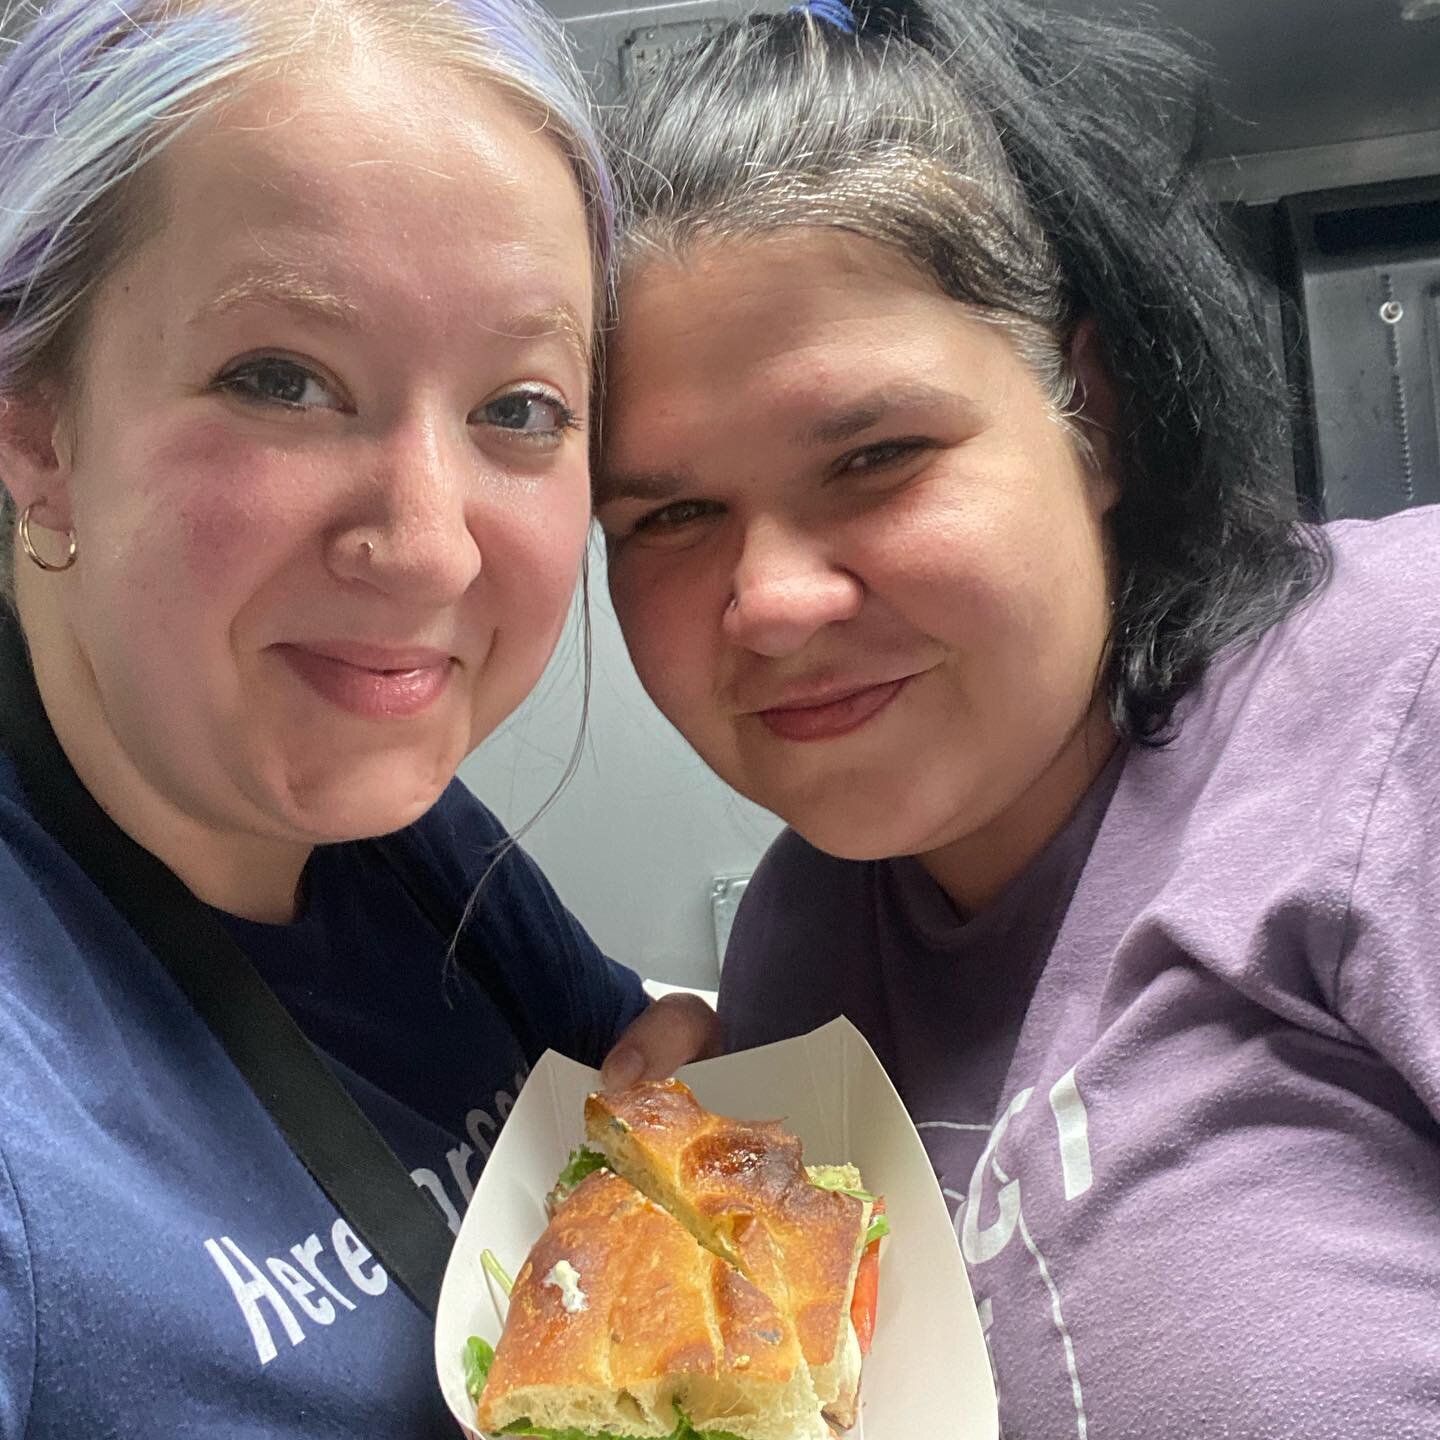 Chef Marianne, Amanda, and delicious sandwiches and other goodies await you at @communitytap tonight. Go see them on this lovely evening! #hostmobile #864foodtrucks